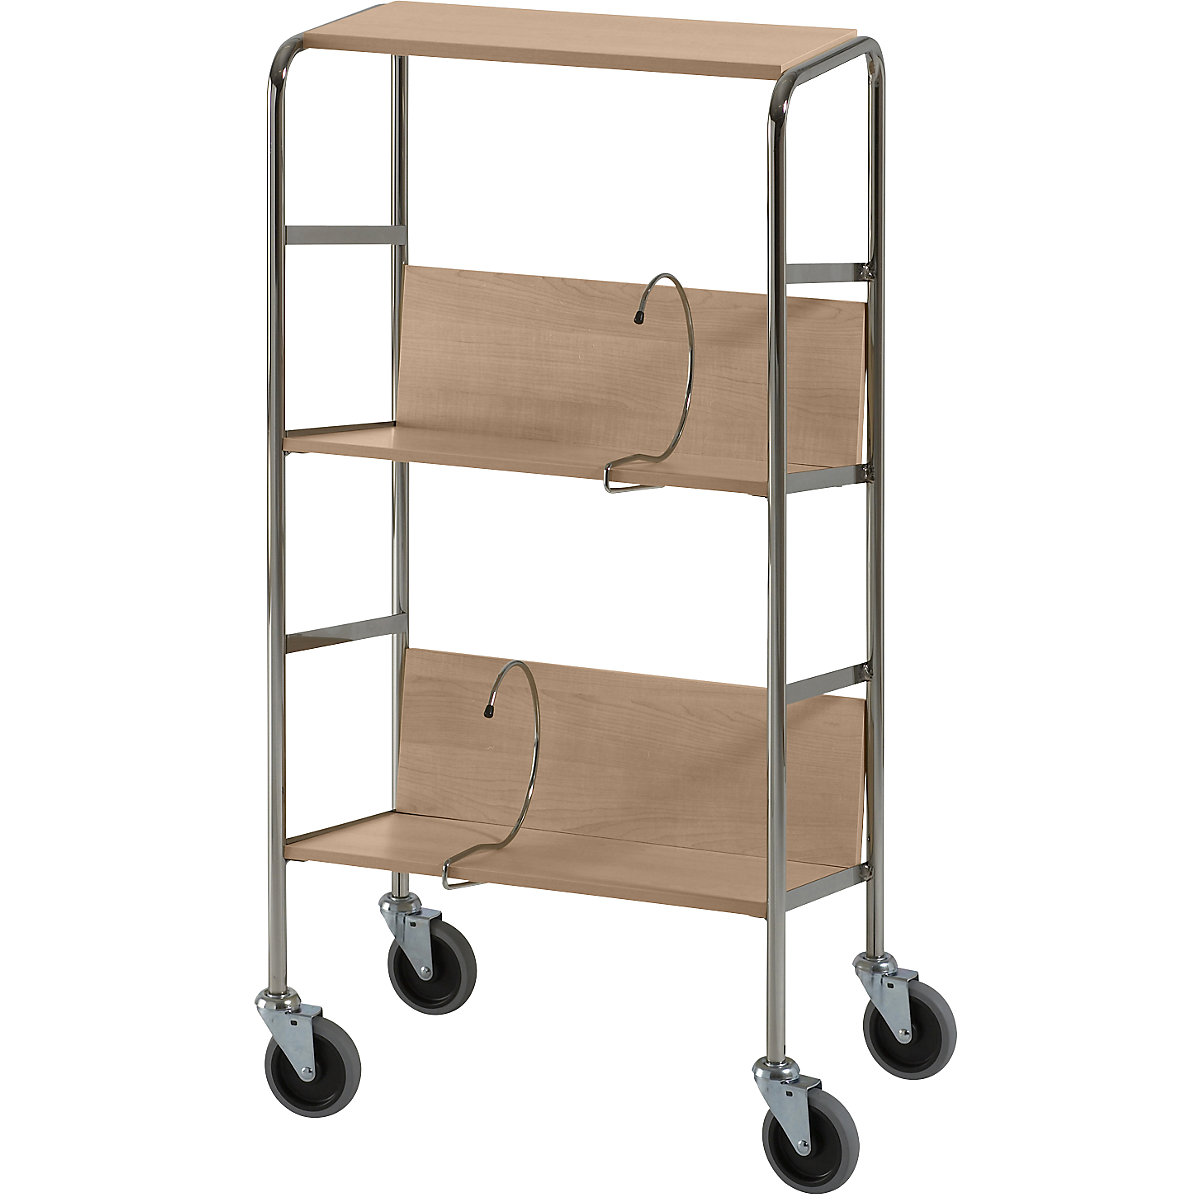 File trolley with top shelf, chrome plated – HelgeNyberg, 3 shelves, LxWxH 550 x 340 x 1060 mm, oak finish, 5+ items-28